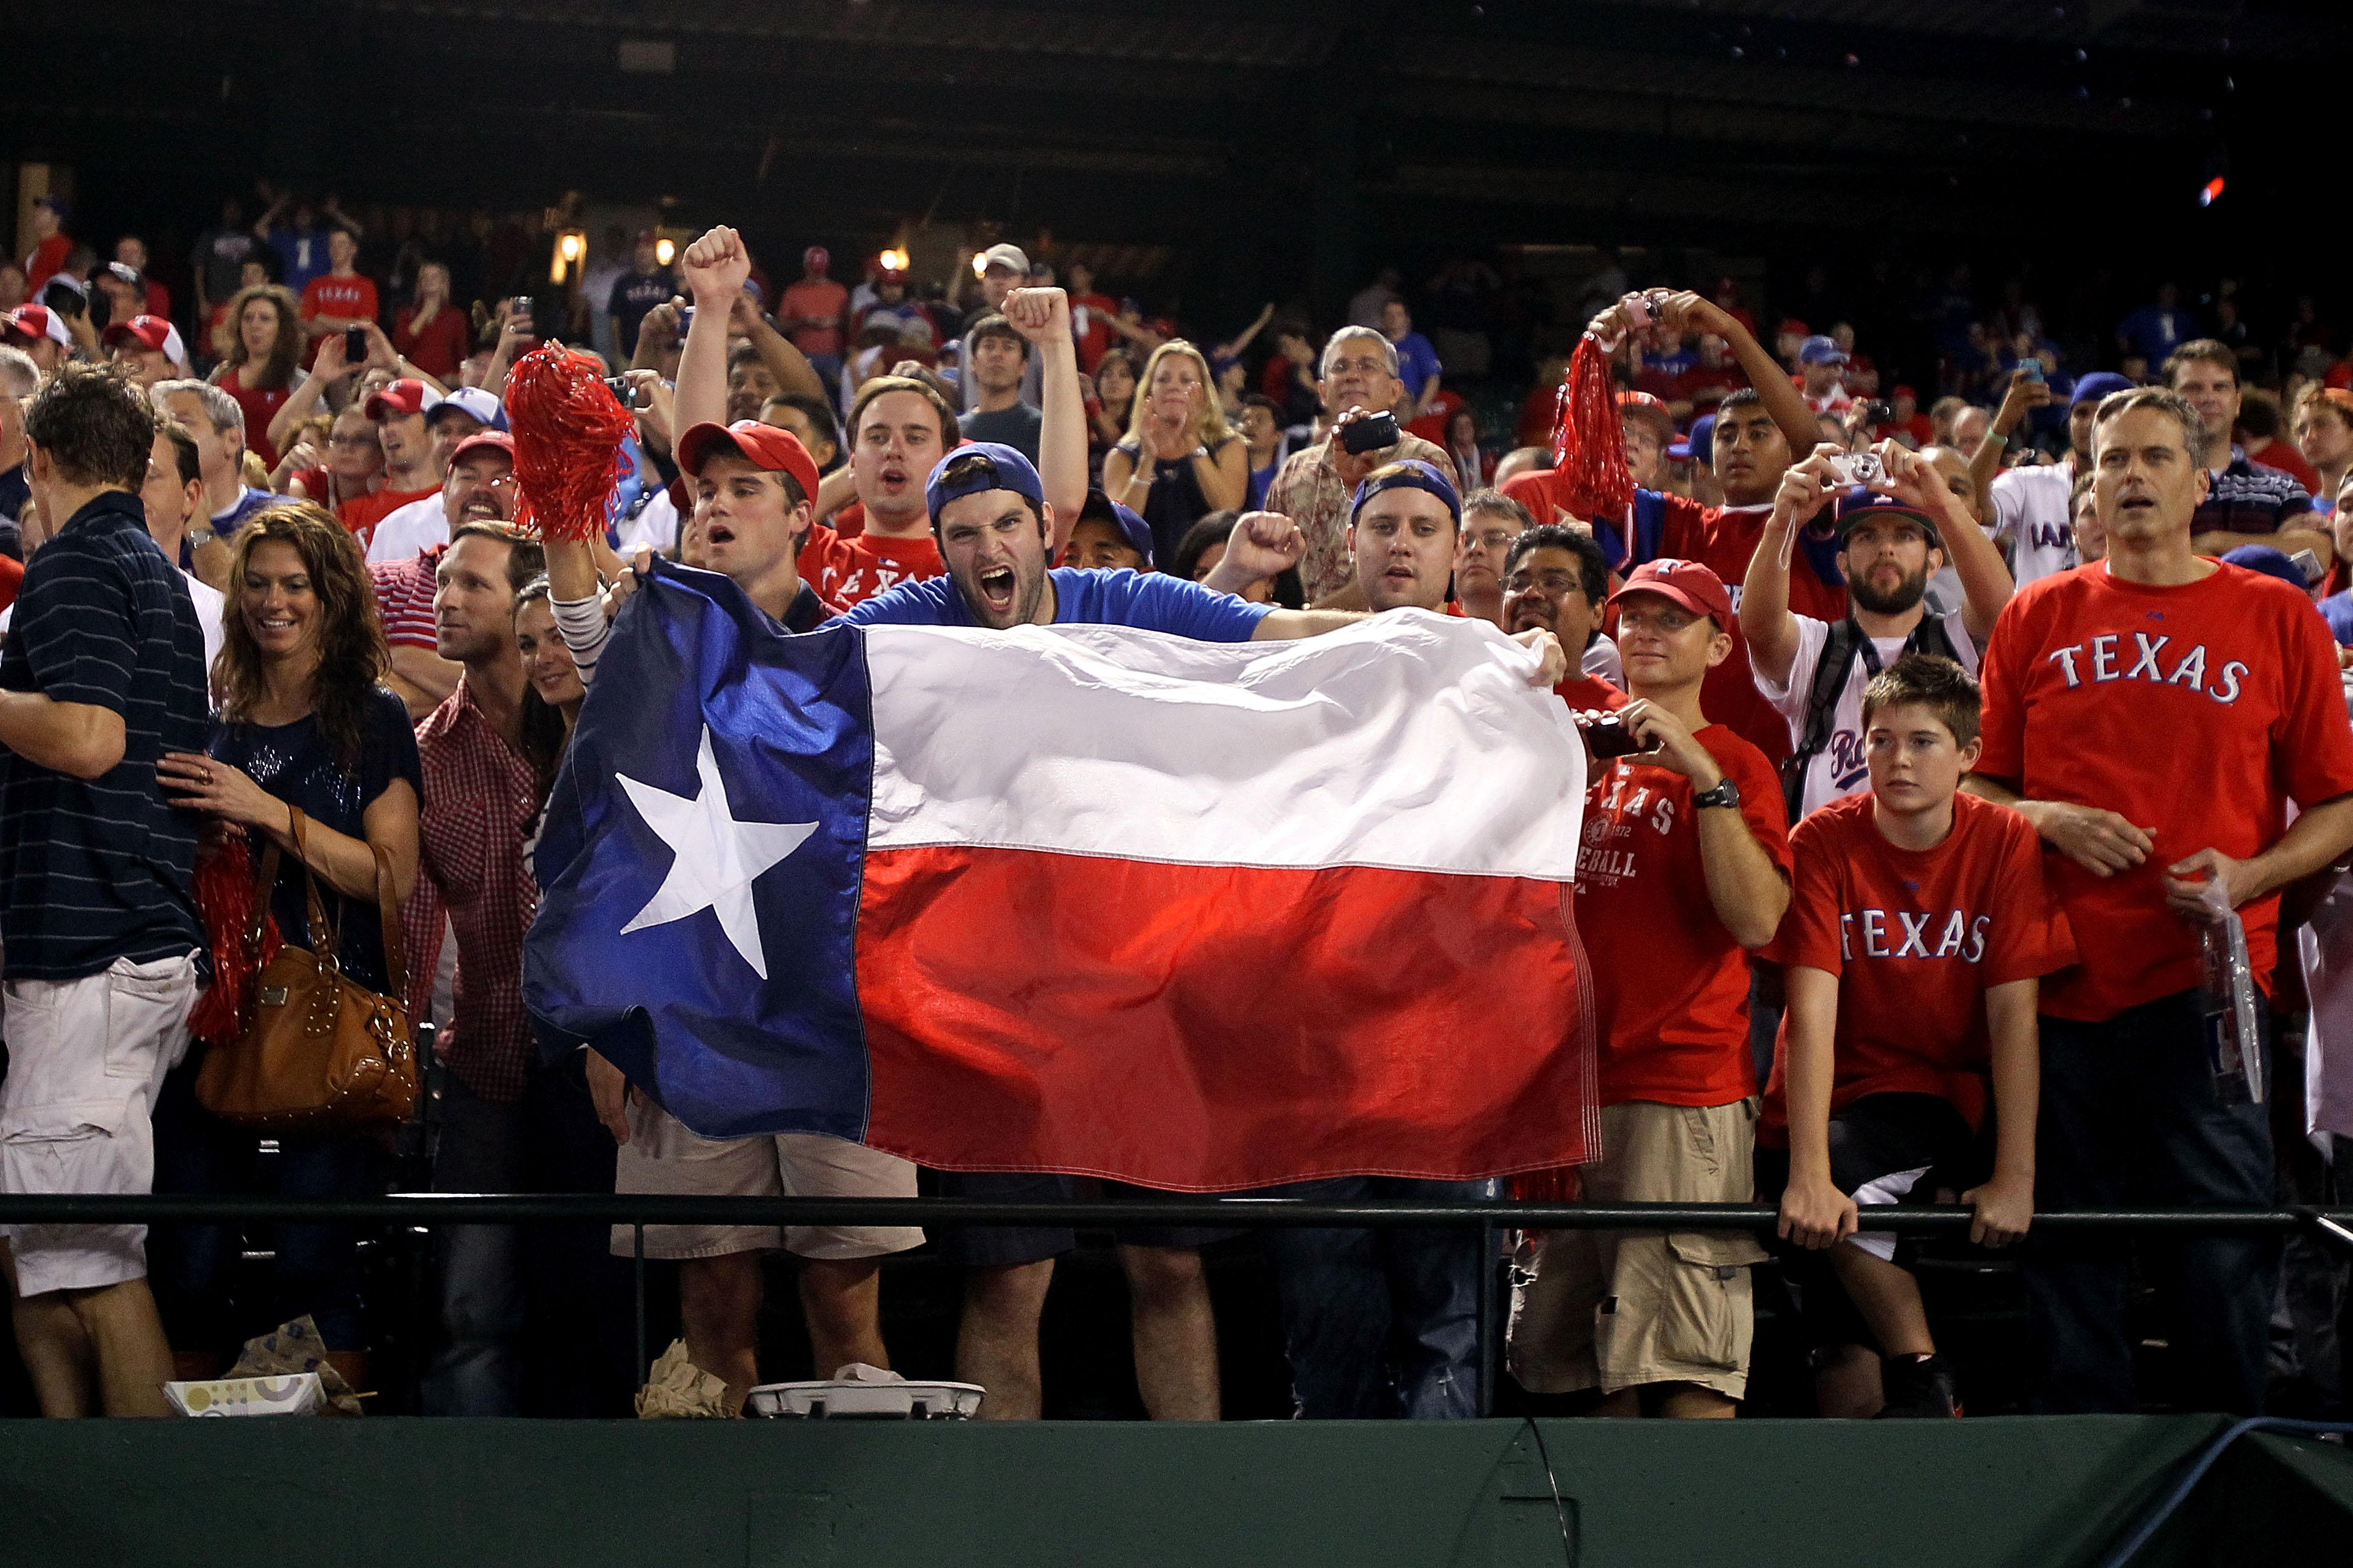 ARLINGTON, TX - OCTOBER 22:  Fans of the Texas Rangers holds a Texas state flag during Game Six of the ALCS against the New York Yankees during the 2010 MLB Playoffs at Rangers Ballpark in Arlington on October 22, 2010 in Arlington, Texas.  (Photo by Step